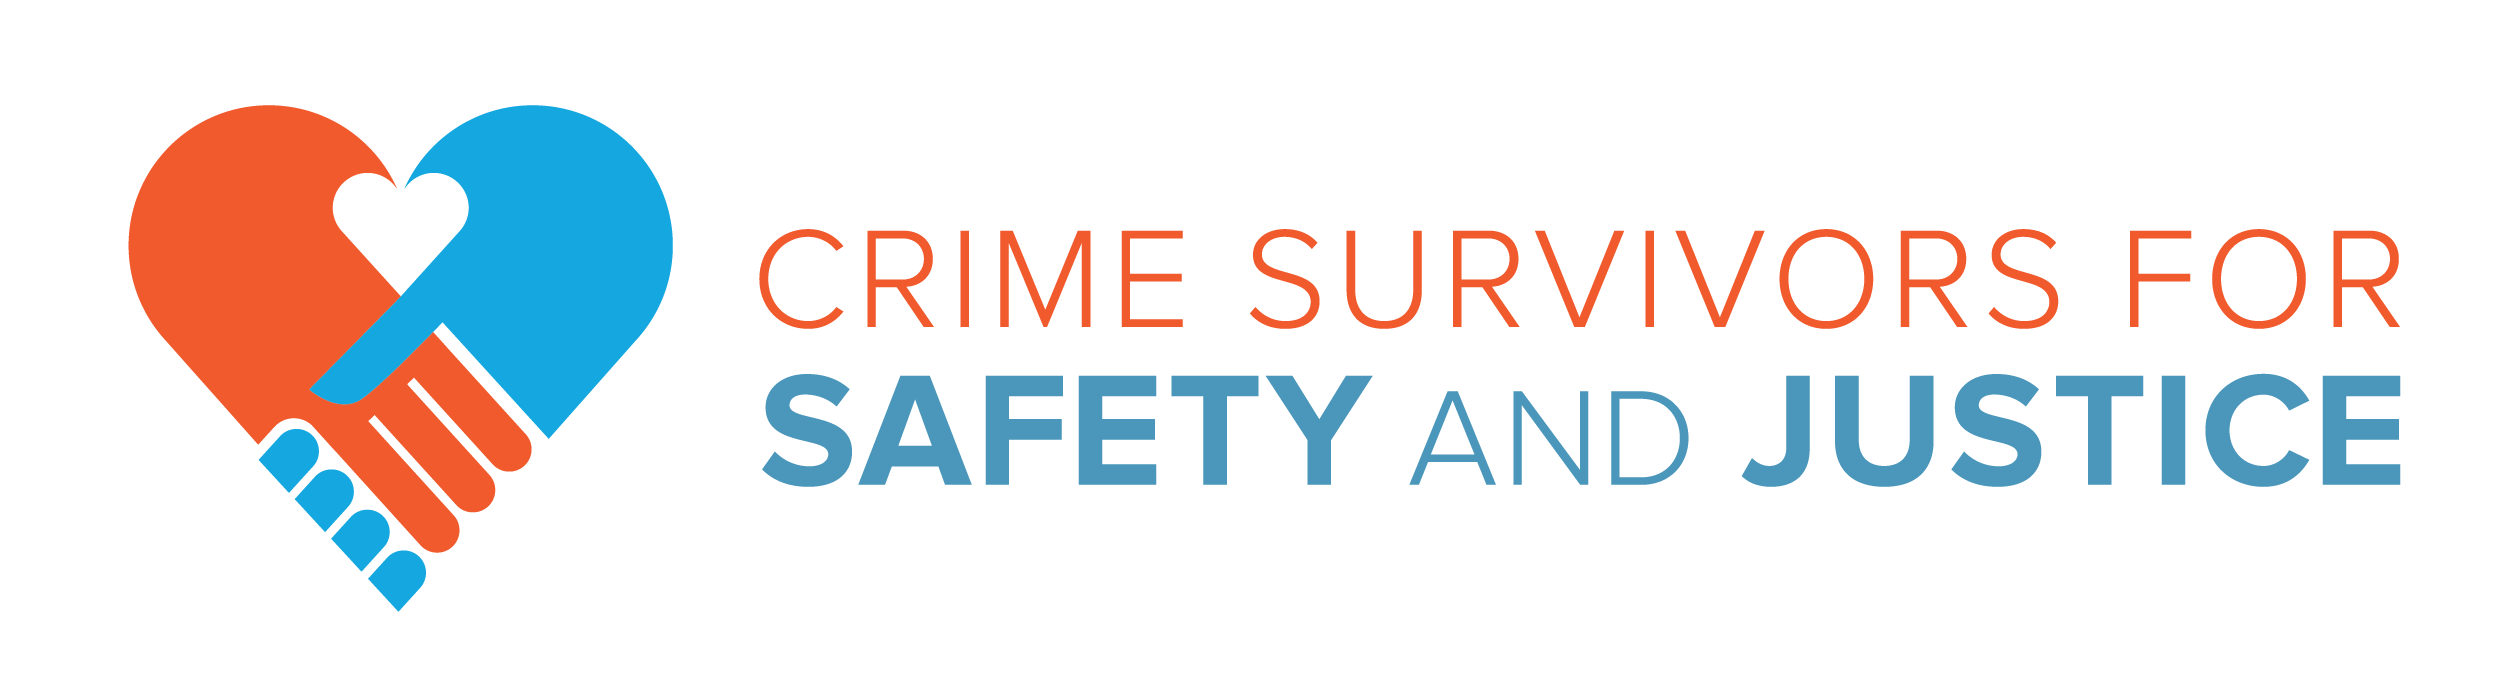 Crime Survivors for Safety and Justice